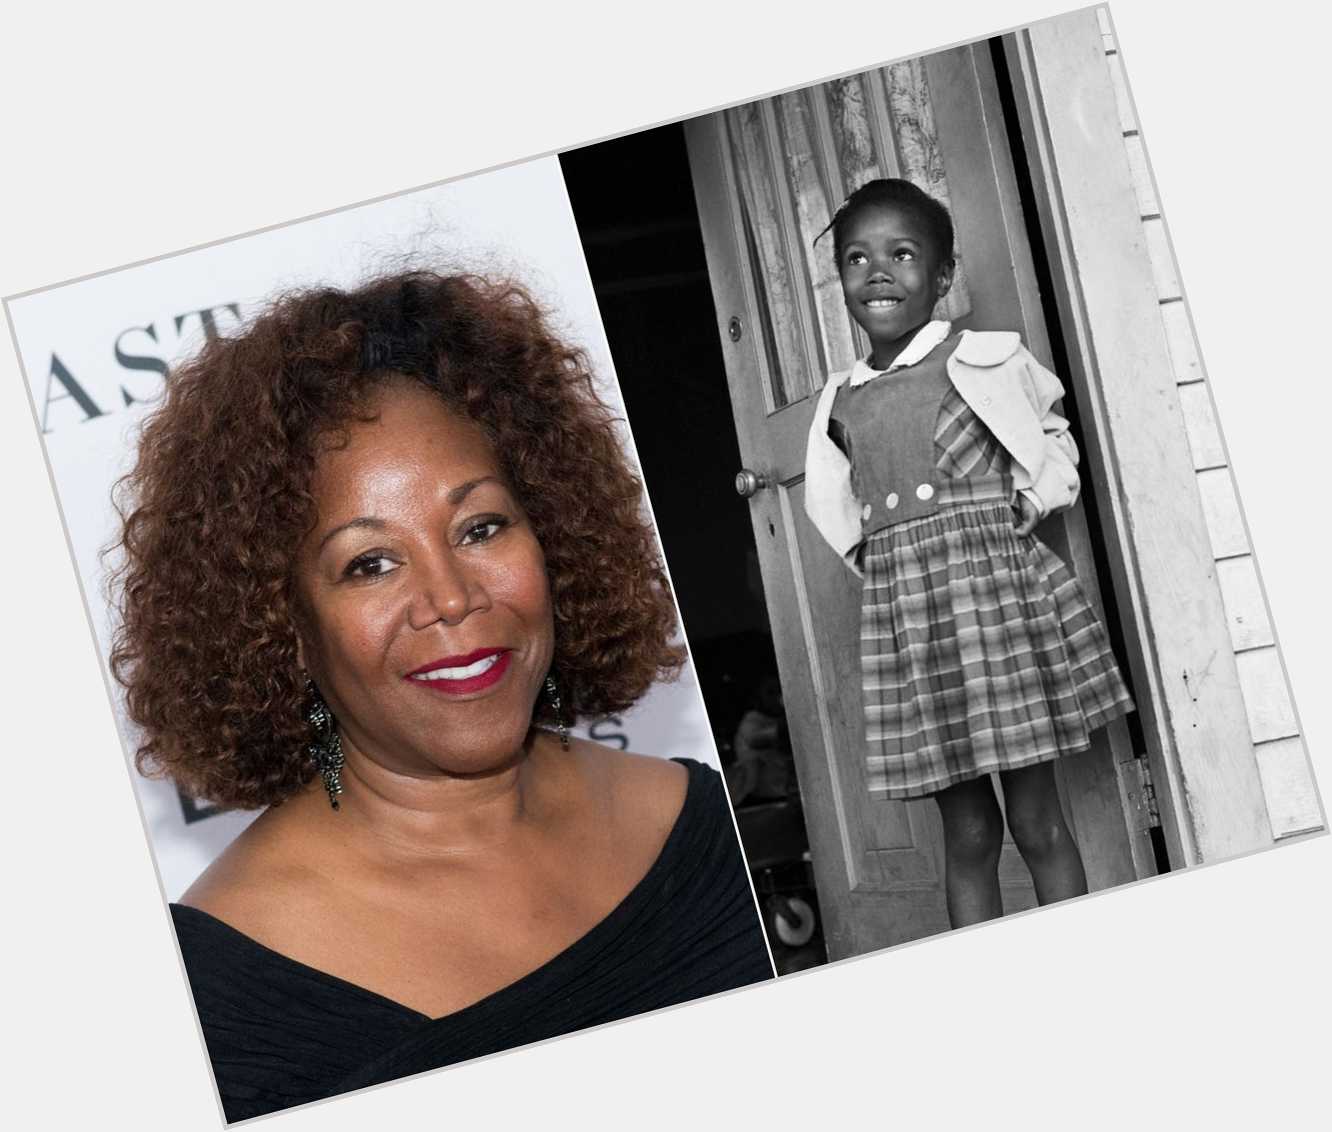 Also, happy birthday to this absolute queen.

Ruby Bridges, born on this day in 1954. 